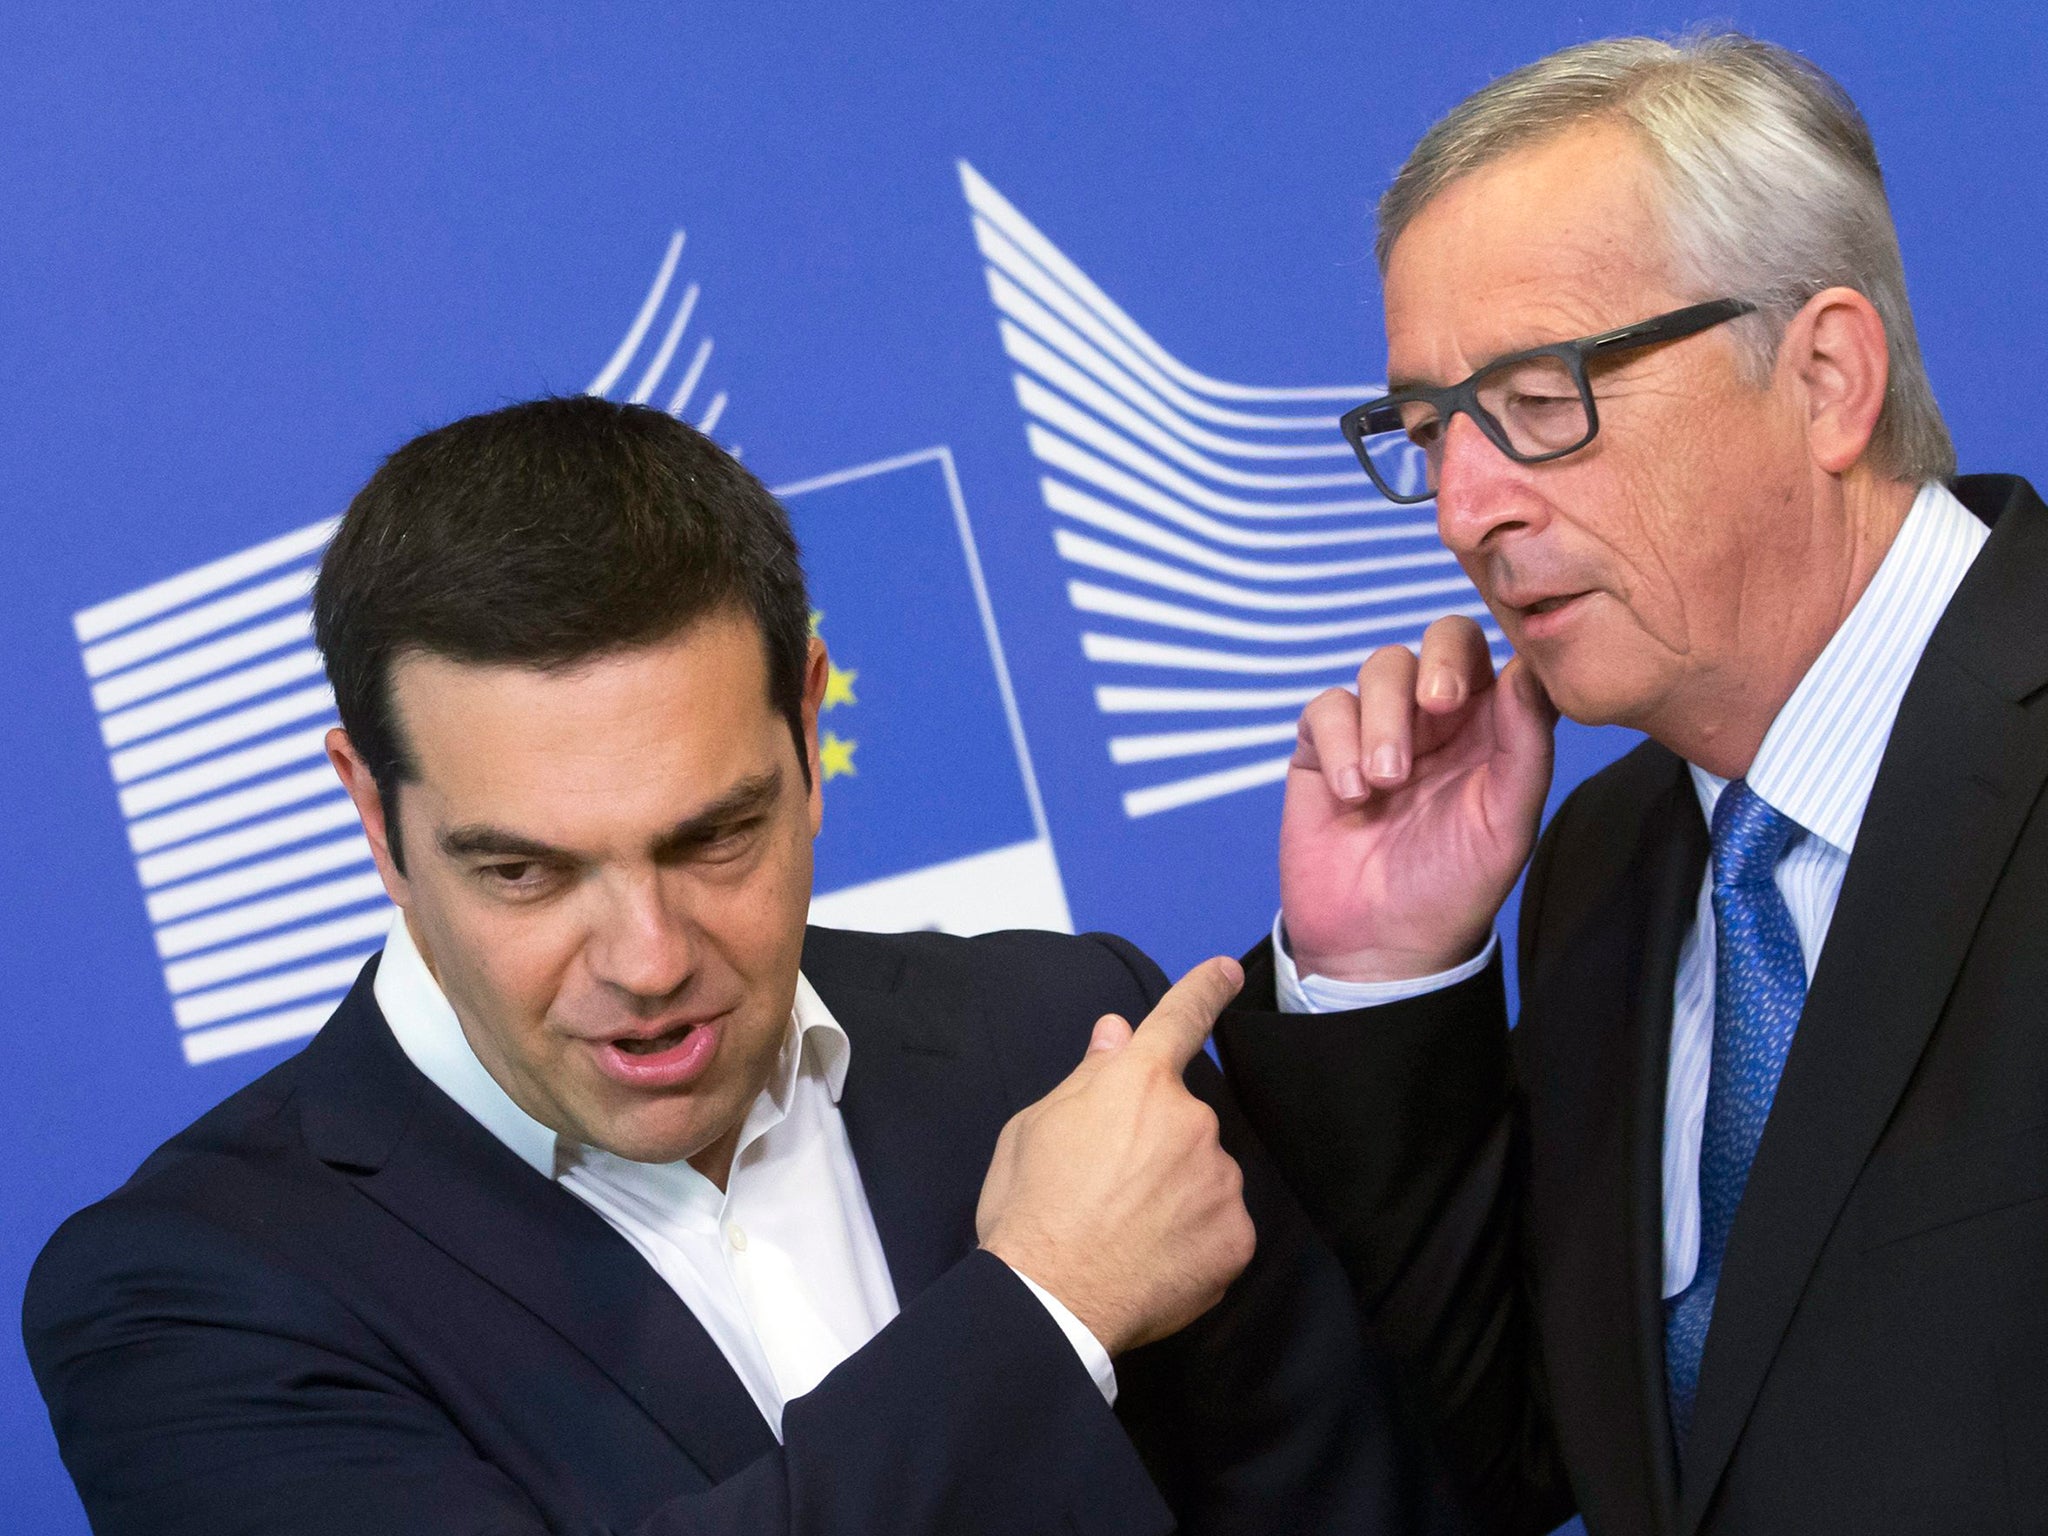 Greece’s Prime Minister Alexis Tsipras, left is welcomed by European Commission President Jean-Claude Juncker ahead of the summit on Monday